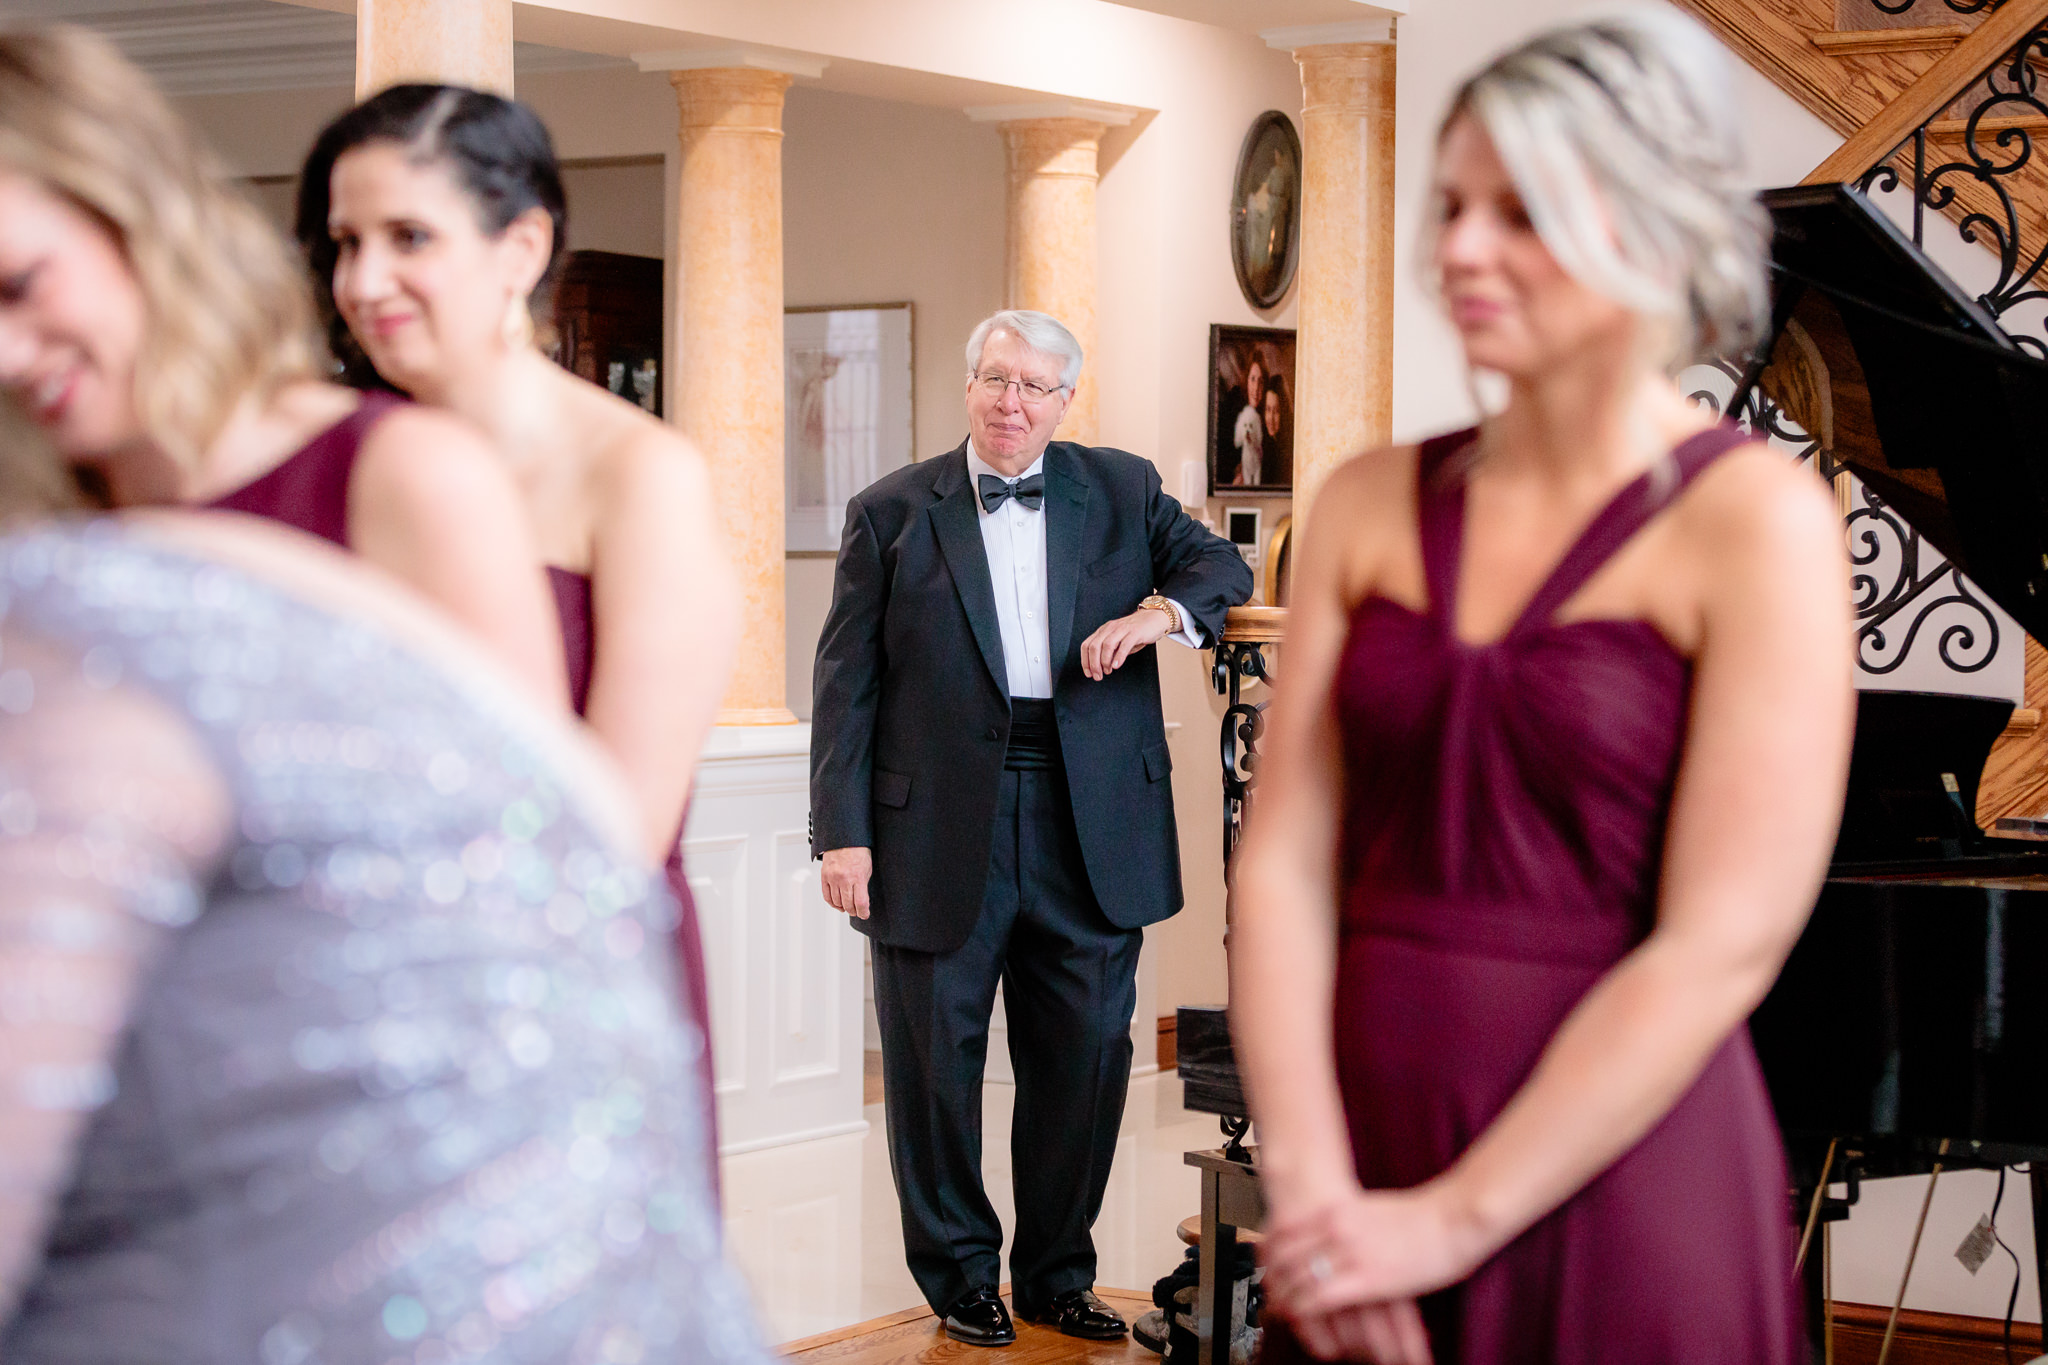 Father of the bride looks on as bridesmaids button her dress